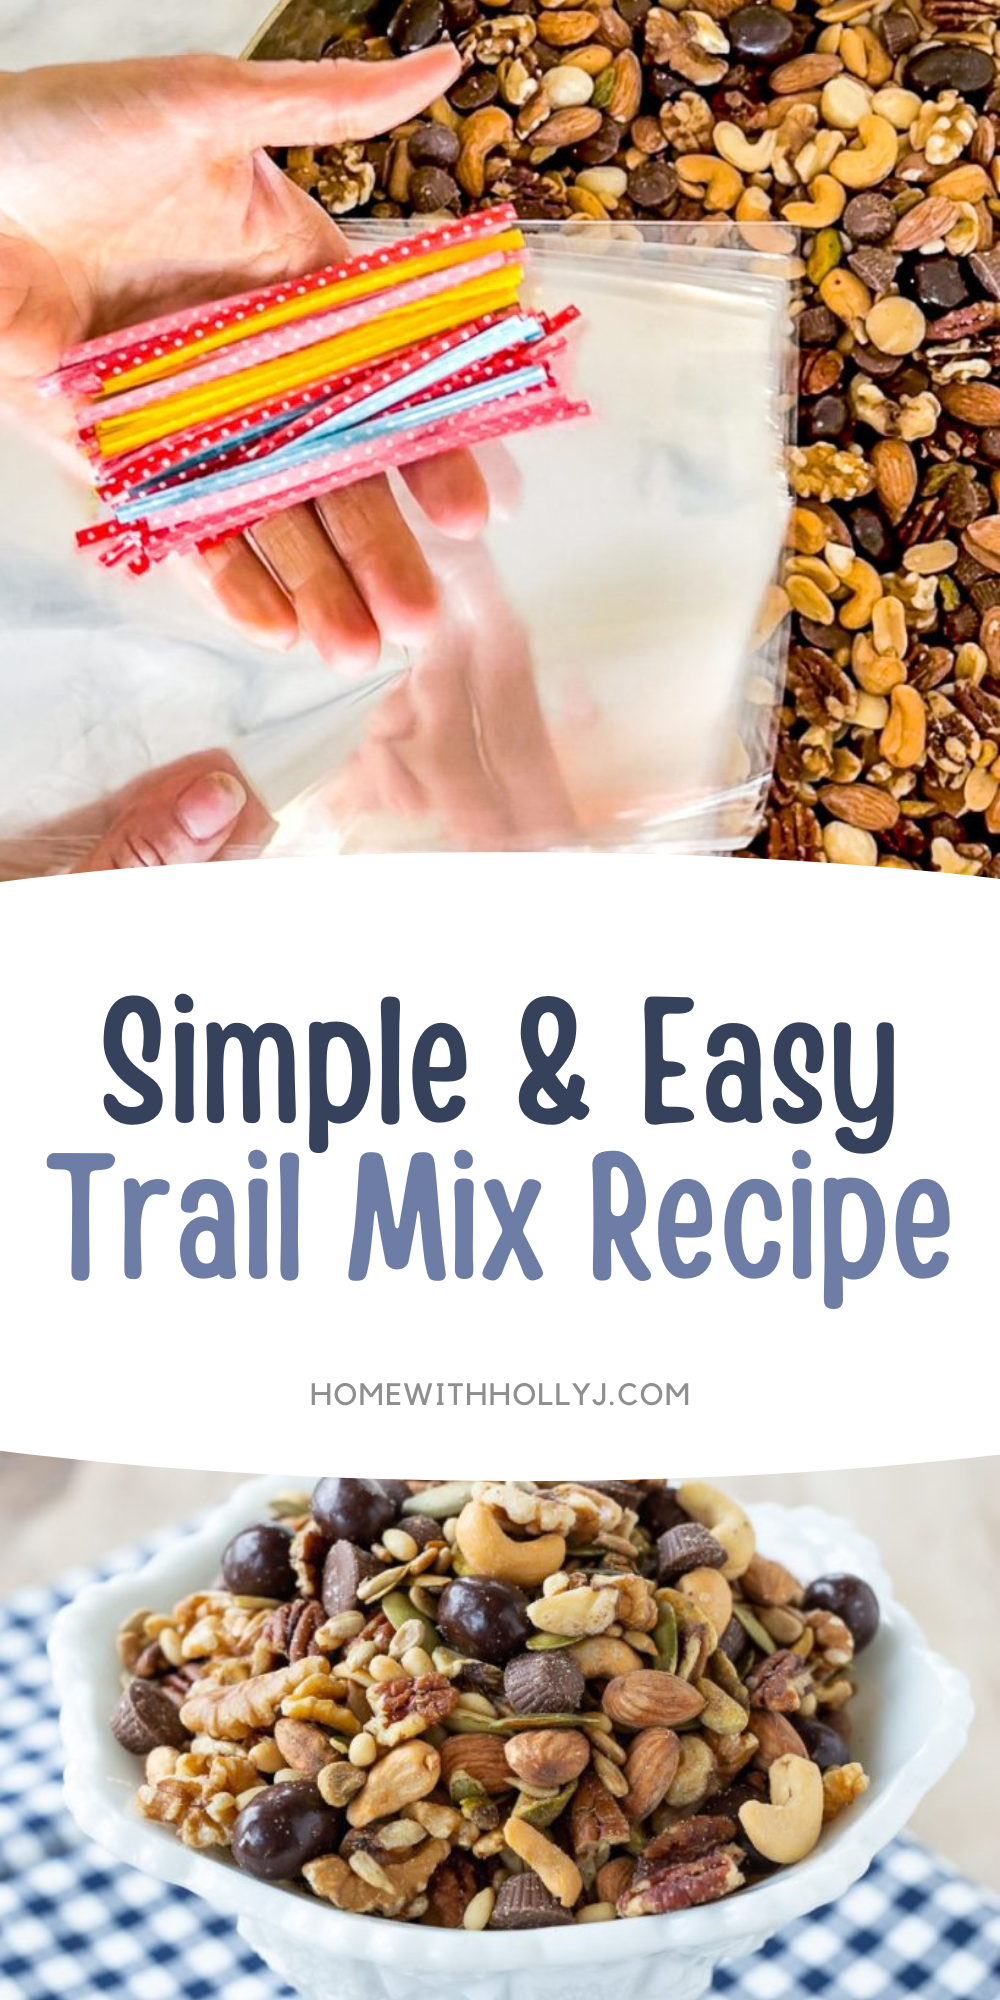 Sharing a simple trail mix recipe, including a variety of nuts, seeds, chocolate, and more - the perfect snack for any day.